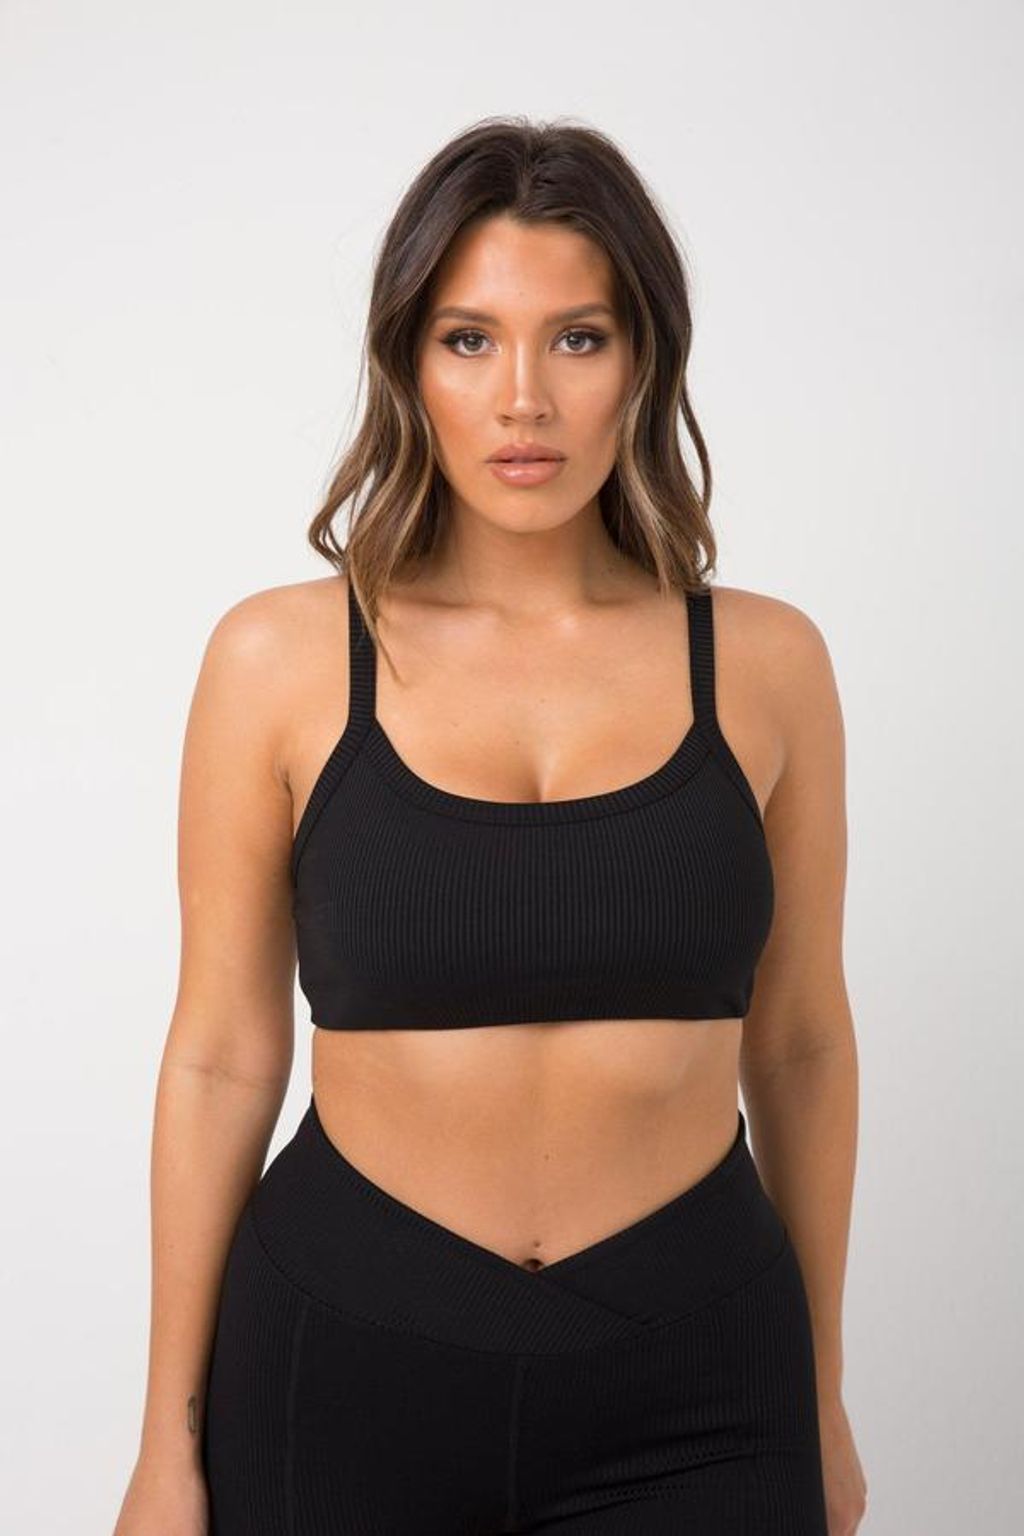 ribbed-bralette-20-sports-bra-year-of-ours-black-extra-small-3_600x.jpg